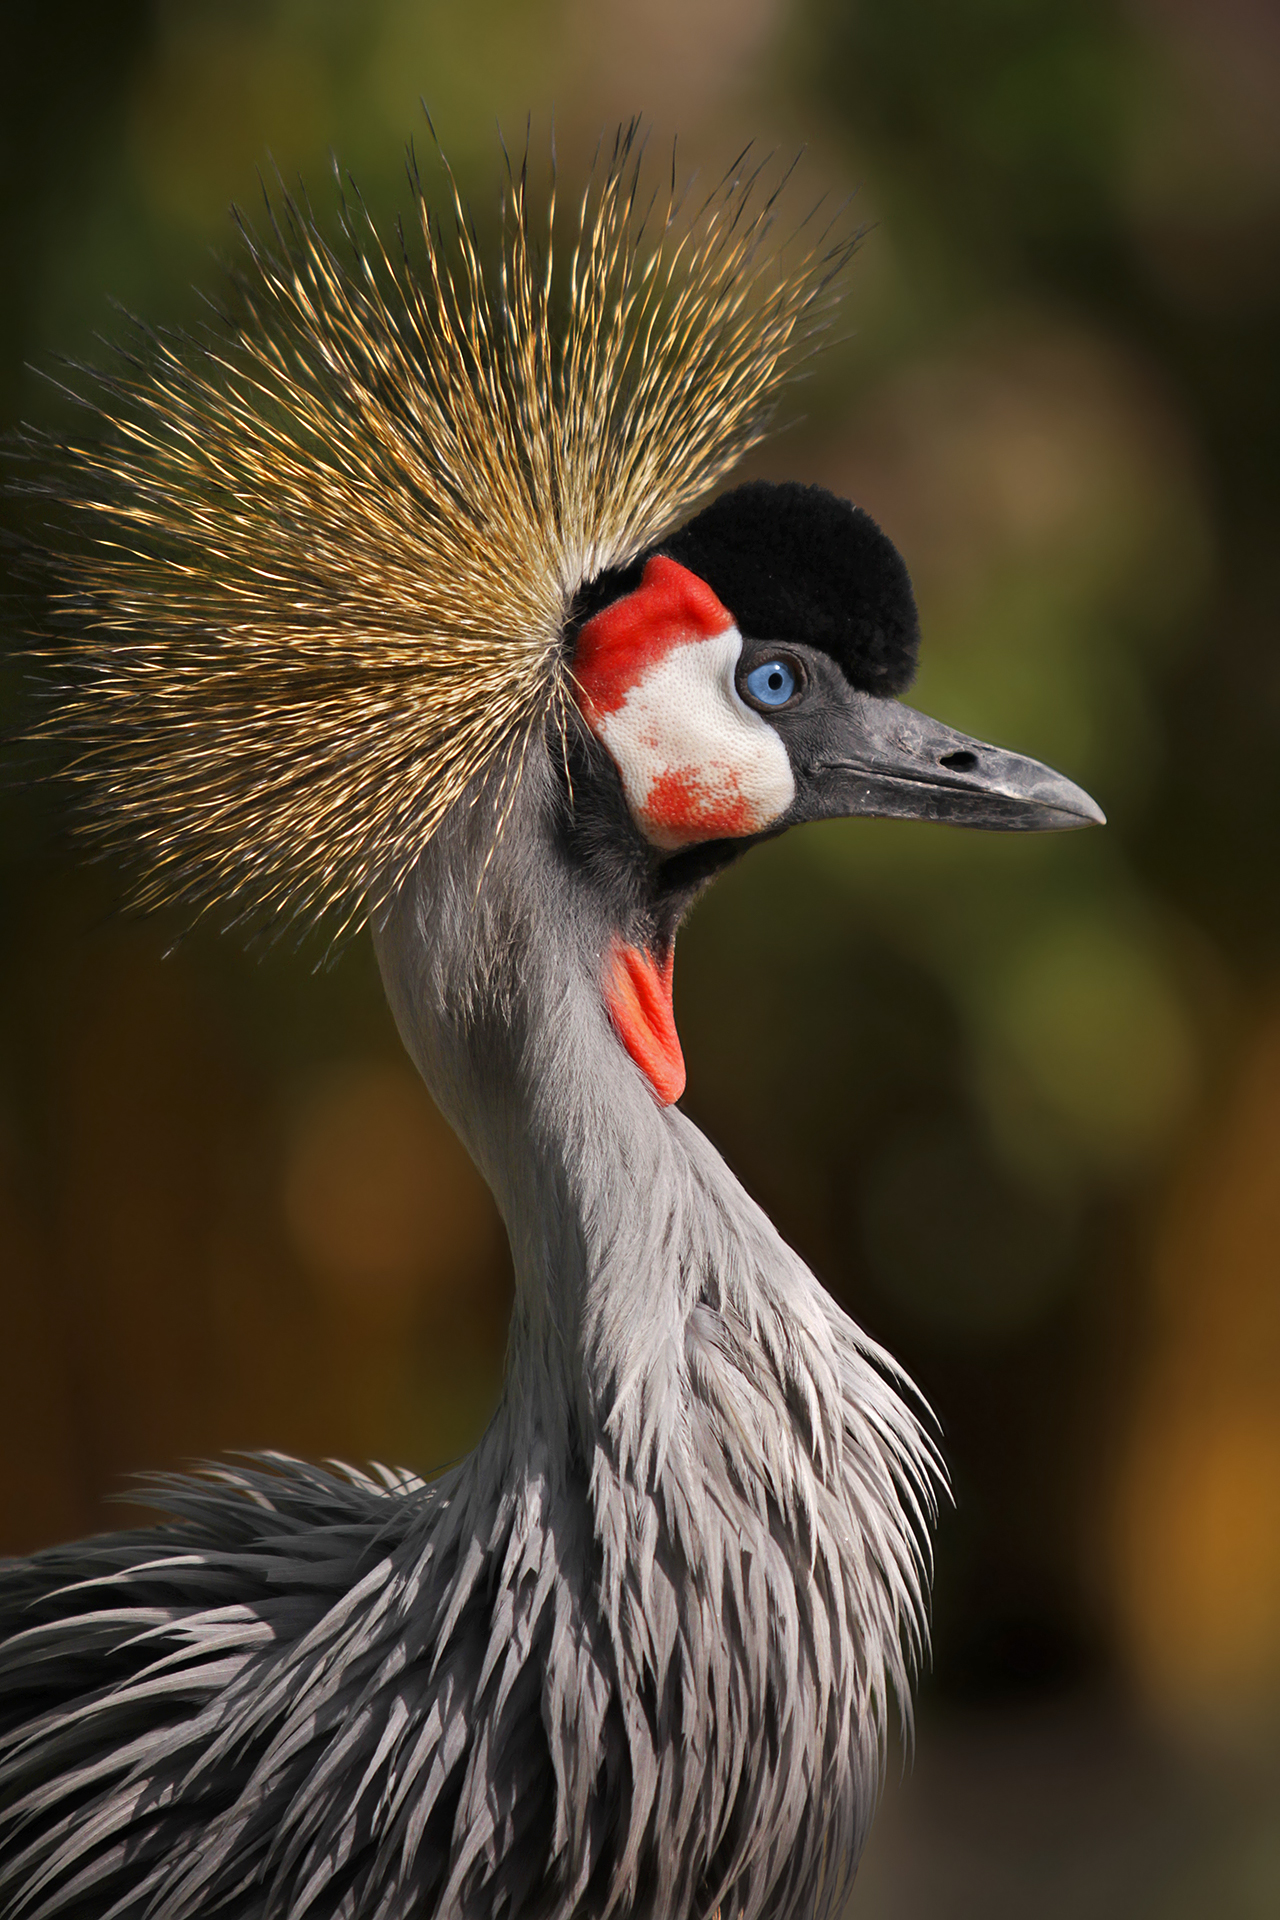 The great grey crowned crane...